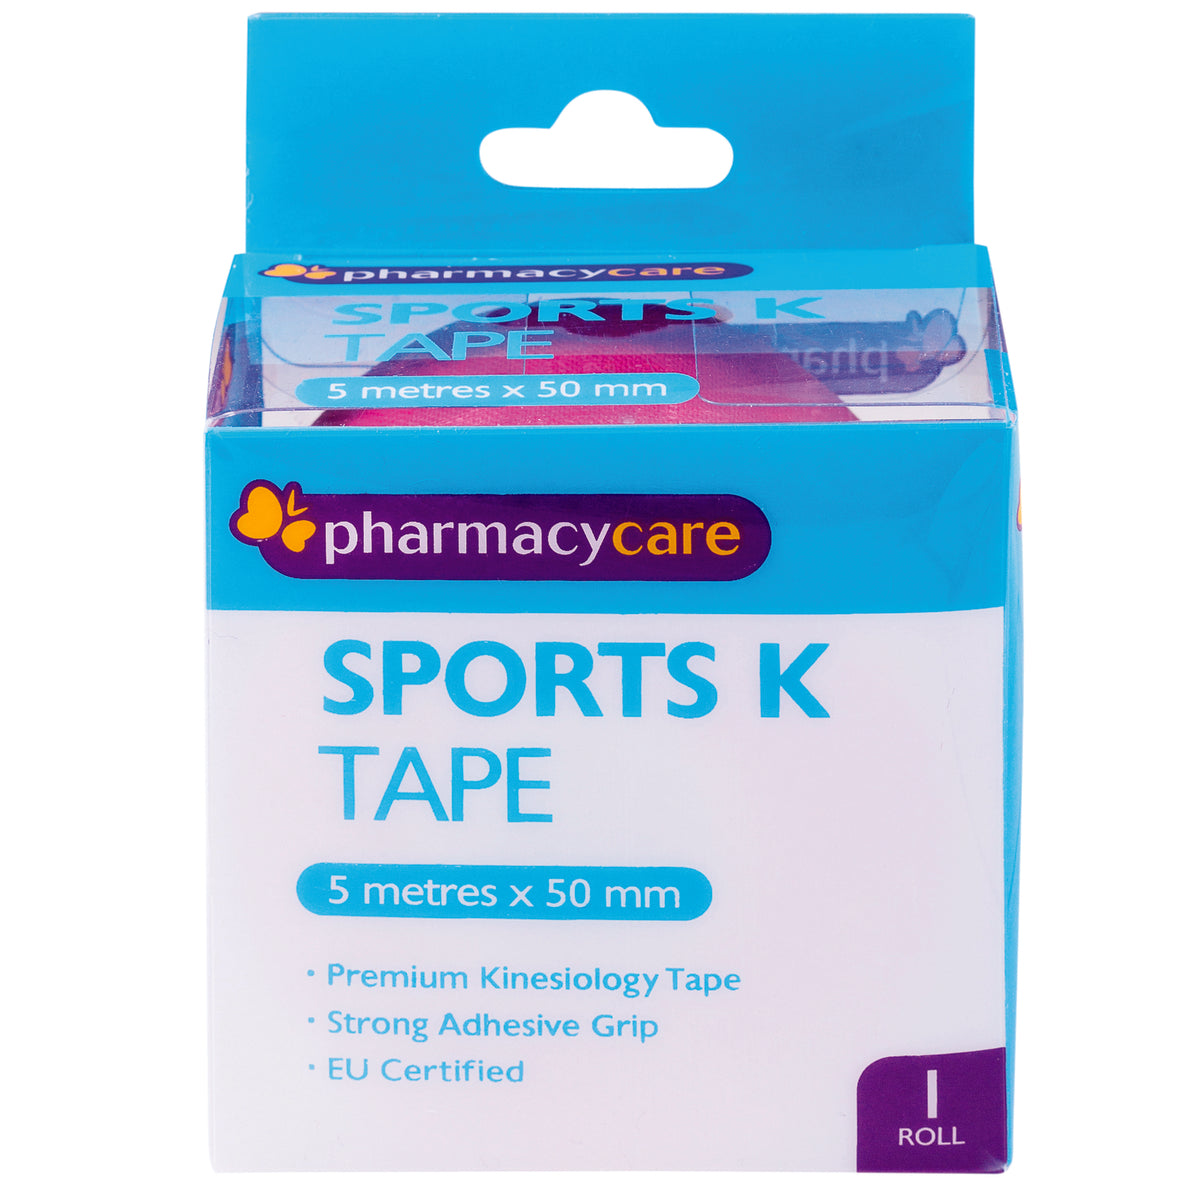 Pharmacy Care Sports K Tape 50mm x 5m Pink